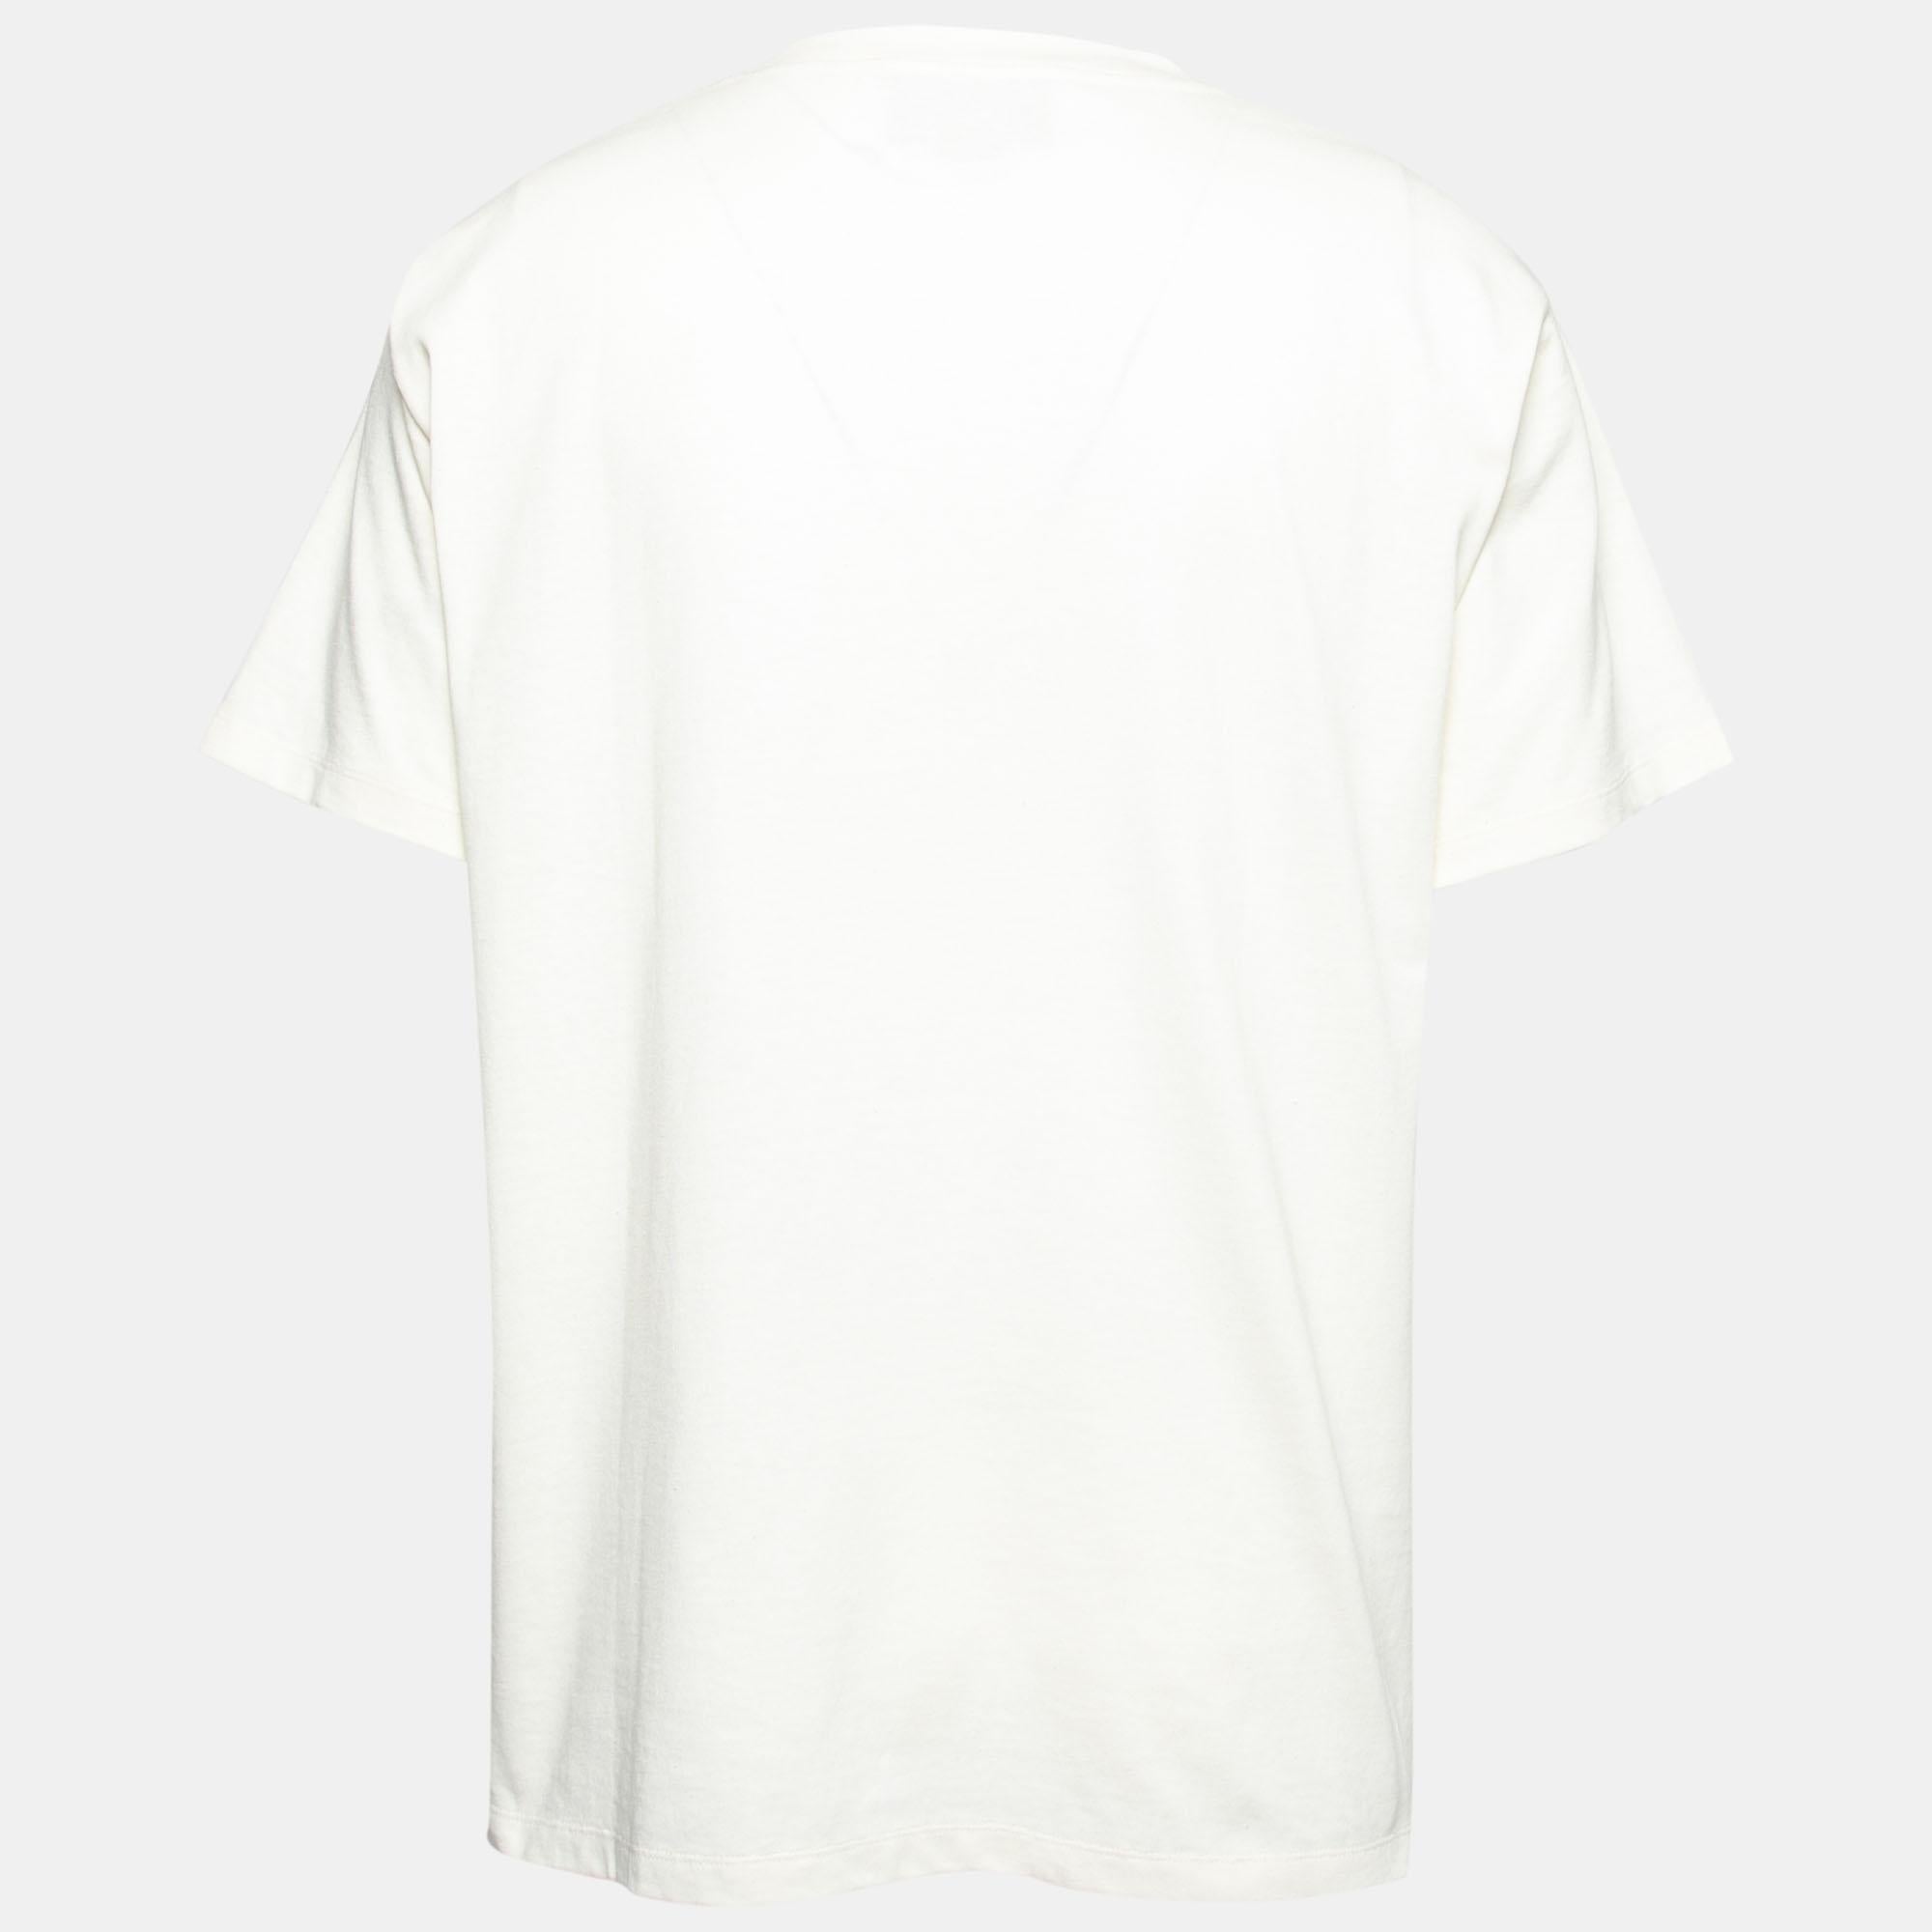 In a collaboration with The North Face, Gucci observes the idea of exploration and adventure. The t-shirt is made from cotton in a creamish shade and features The North Face's prominent half-domed stripe logo integrated with Gucci's signature Web